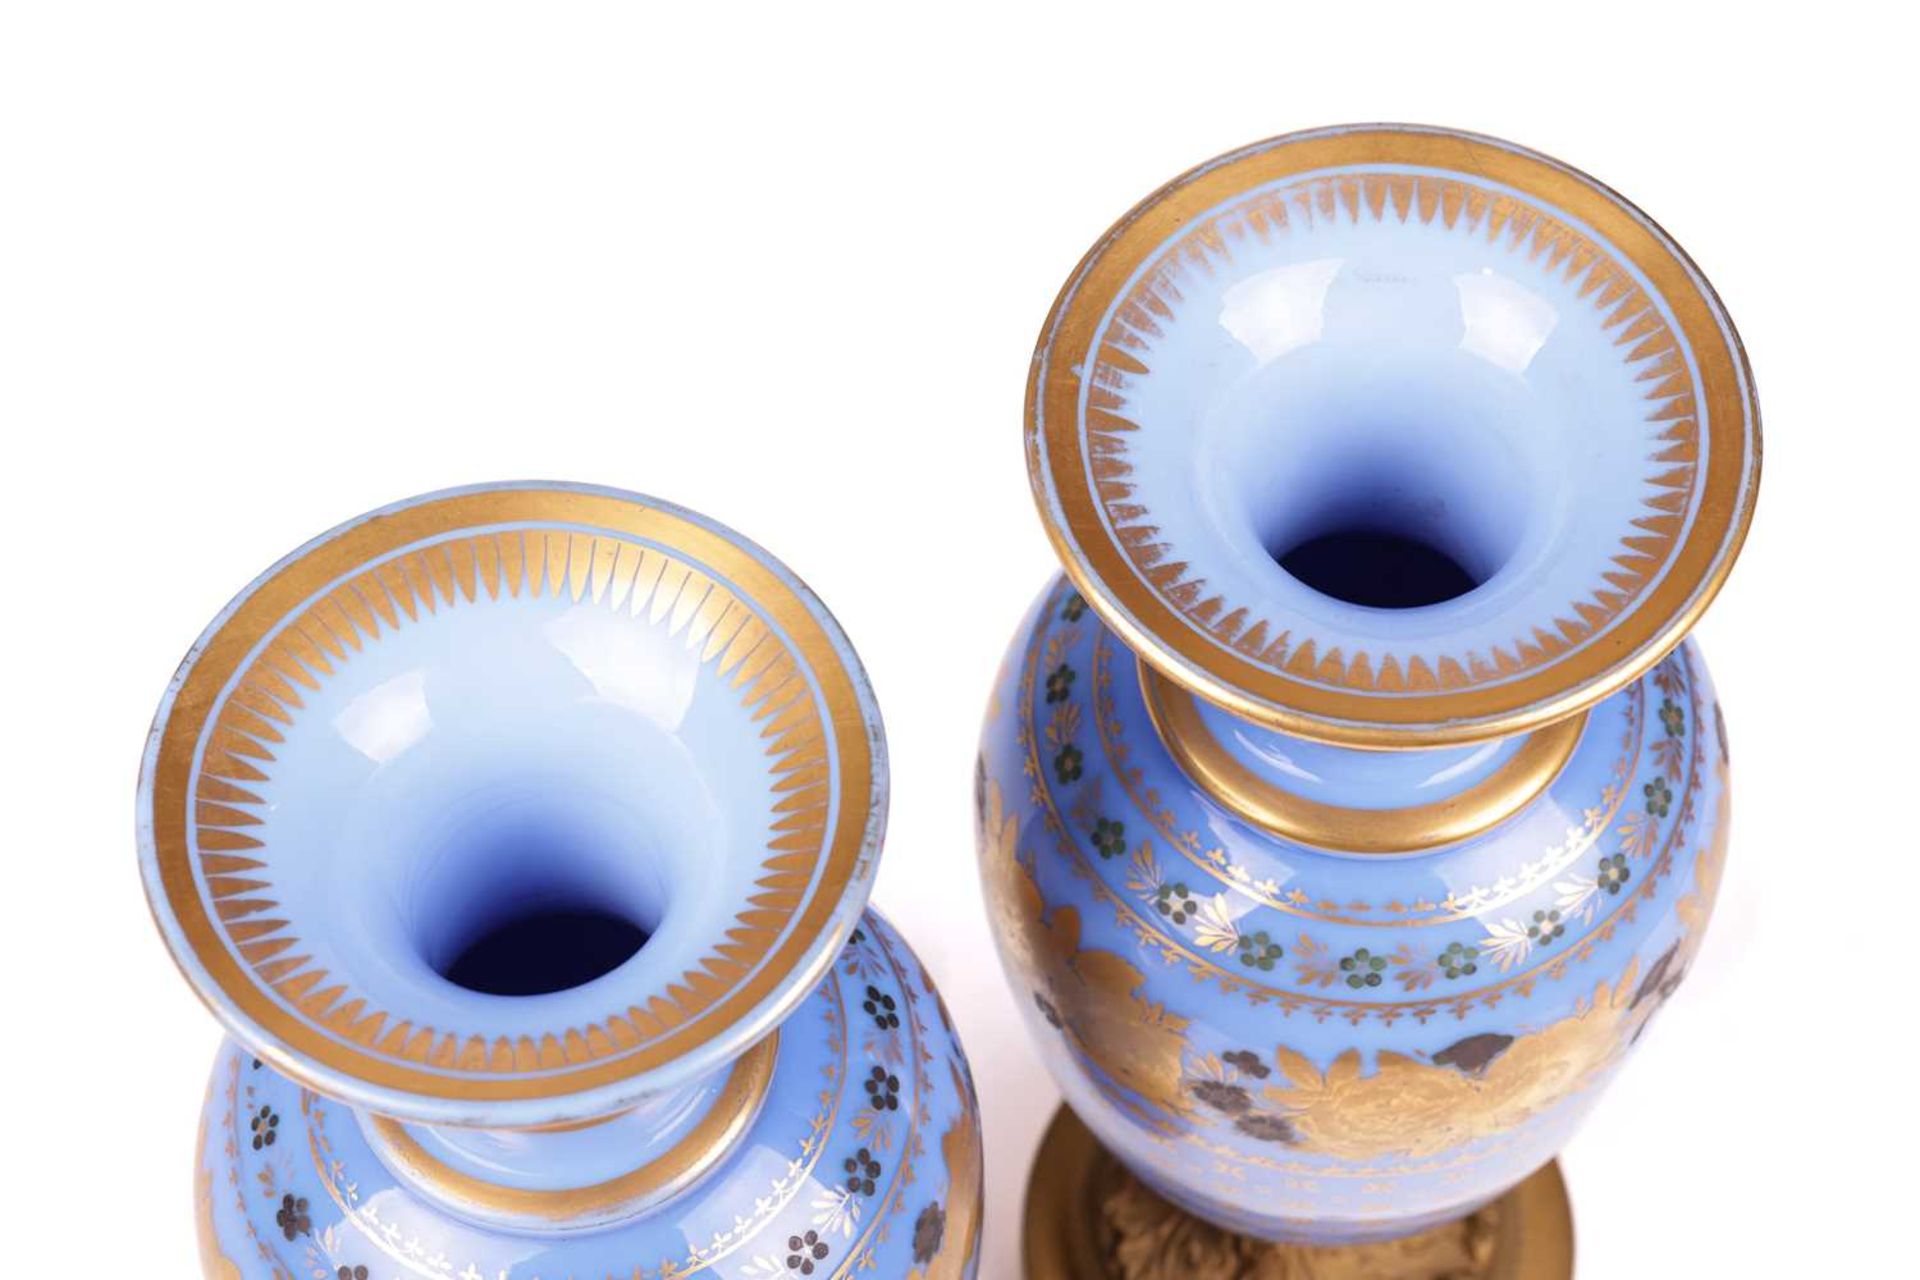 A pair of late 19th century French blue opaline glass and ormolu mounted vases, with gilt-overlaid d - Image 5 of 7